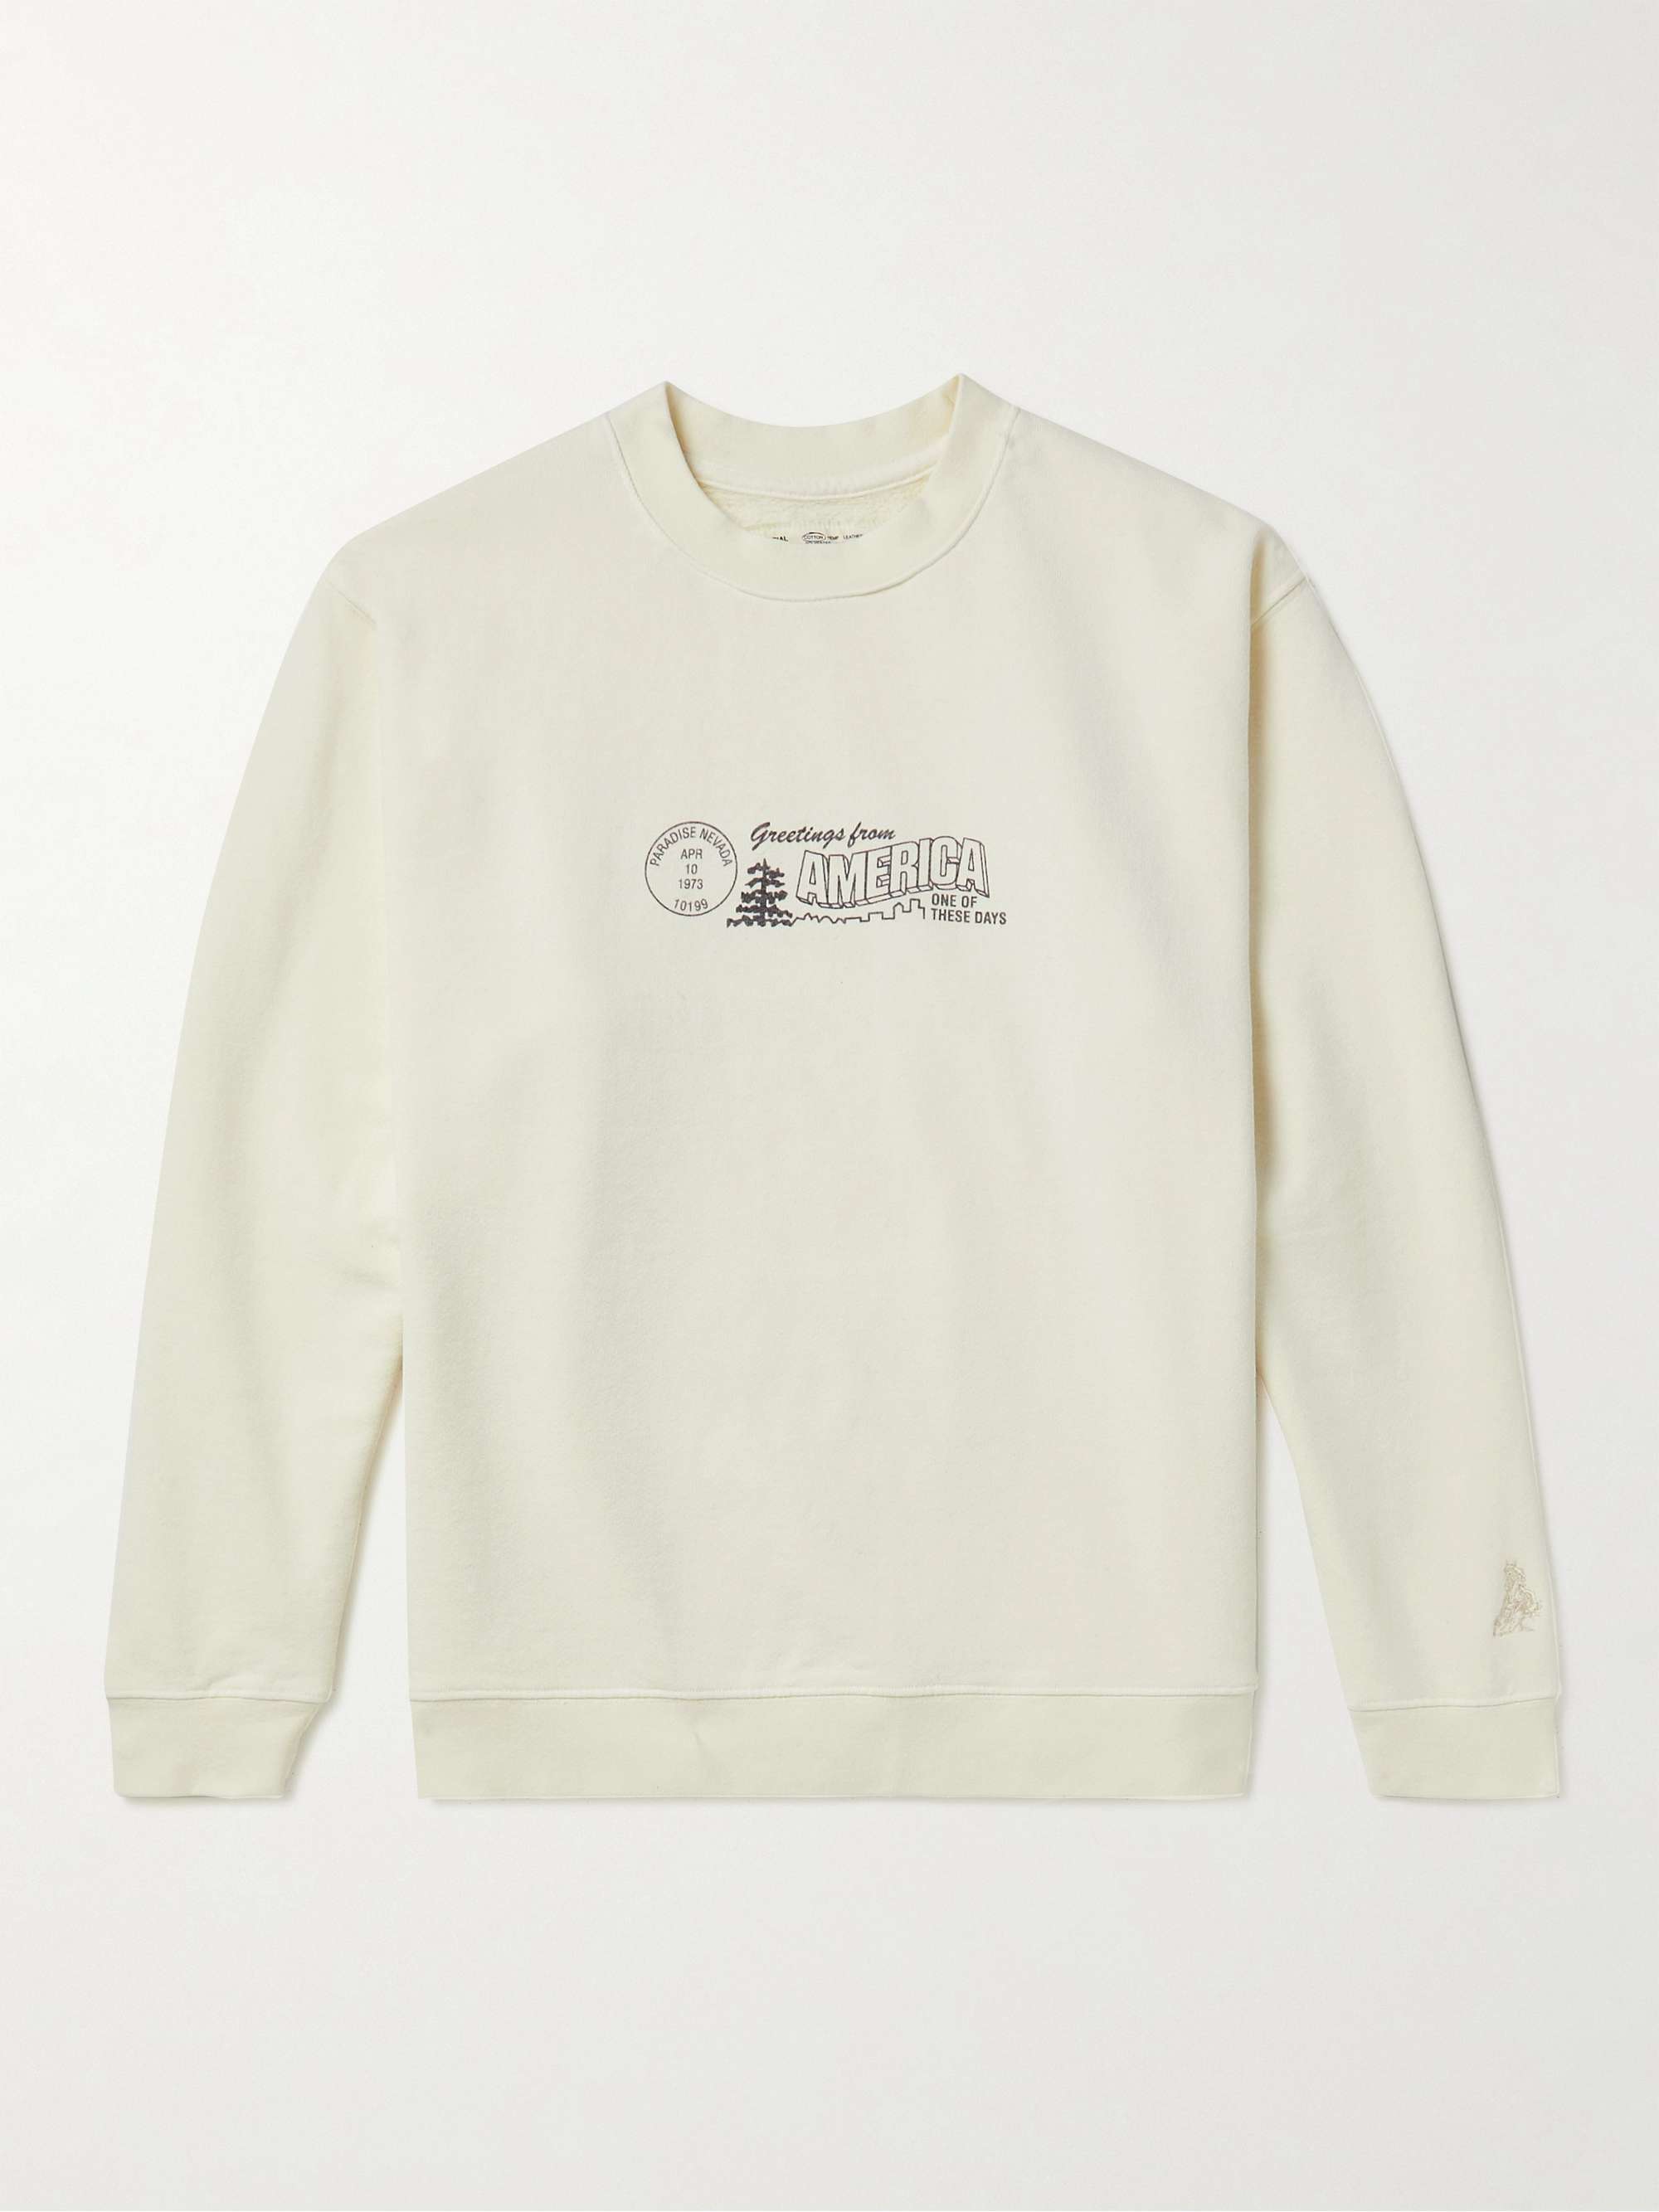 ONE OF THESE DAYS Printed Cotton-Jersey Sweatshirt